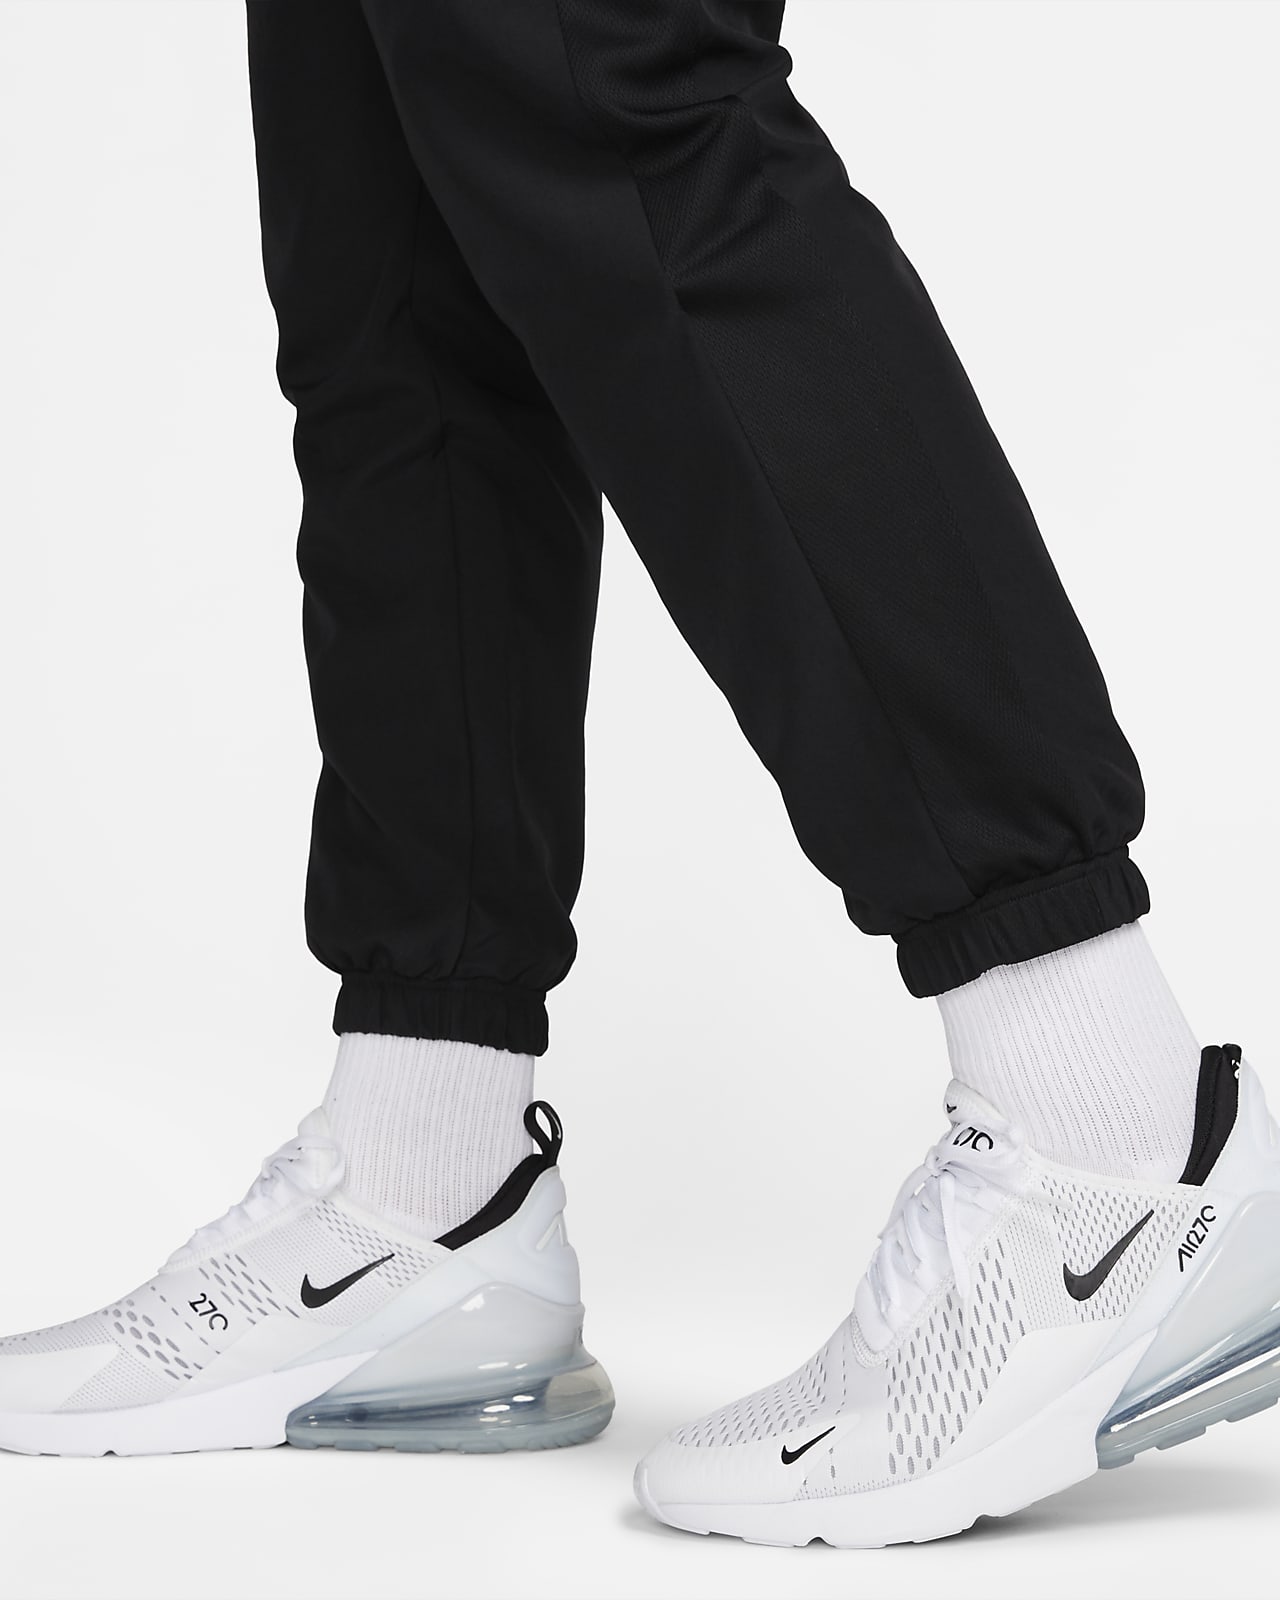 Nike Dri-FIT Academy Woven Track Pant